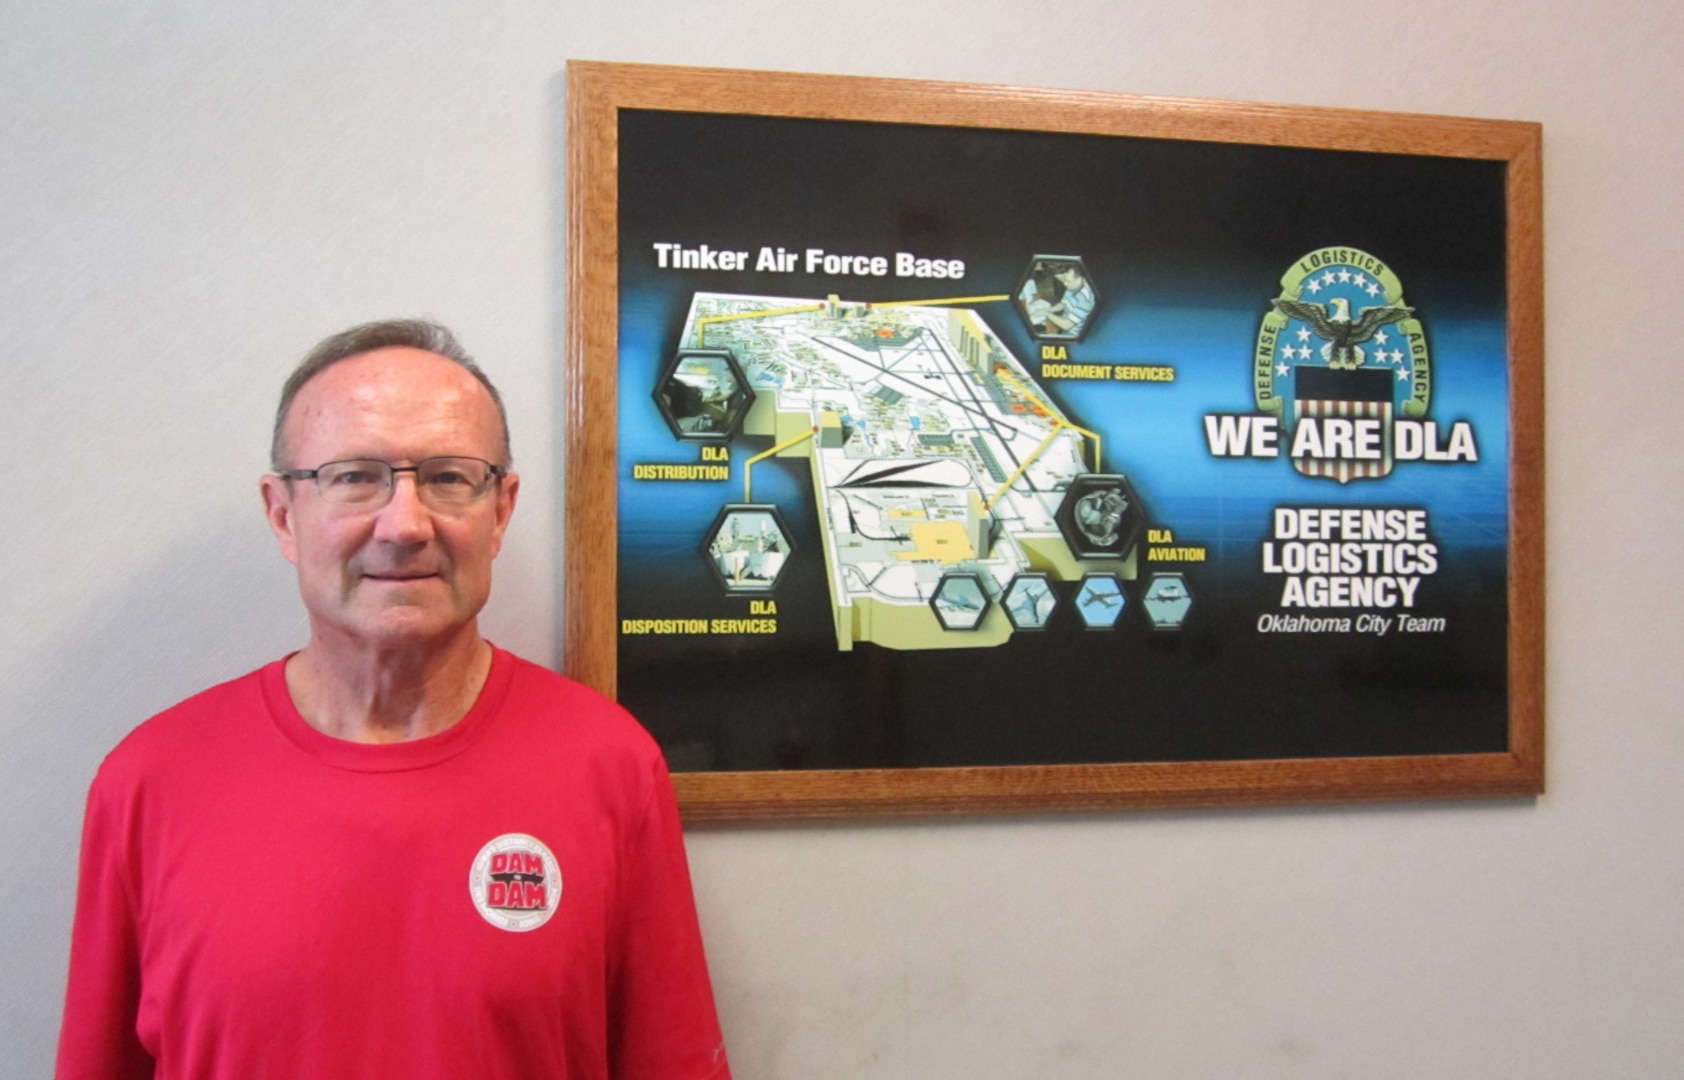 Jack Sandmeier, who is currently a supply technician at Defense Logistics Agency Distribution Oklahoma City, Okla., spent 24 years in the United States Air Force, several of which were during the Vietnam War.  